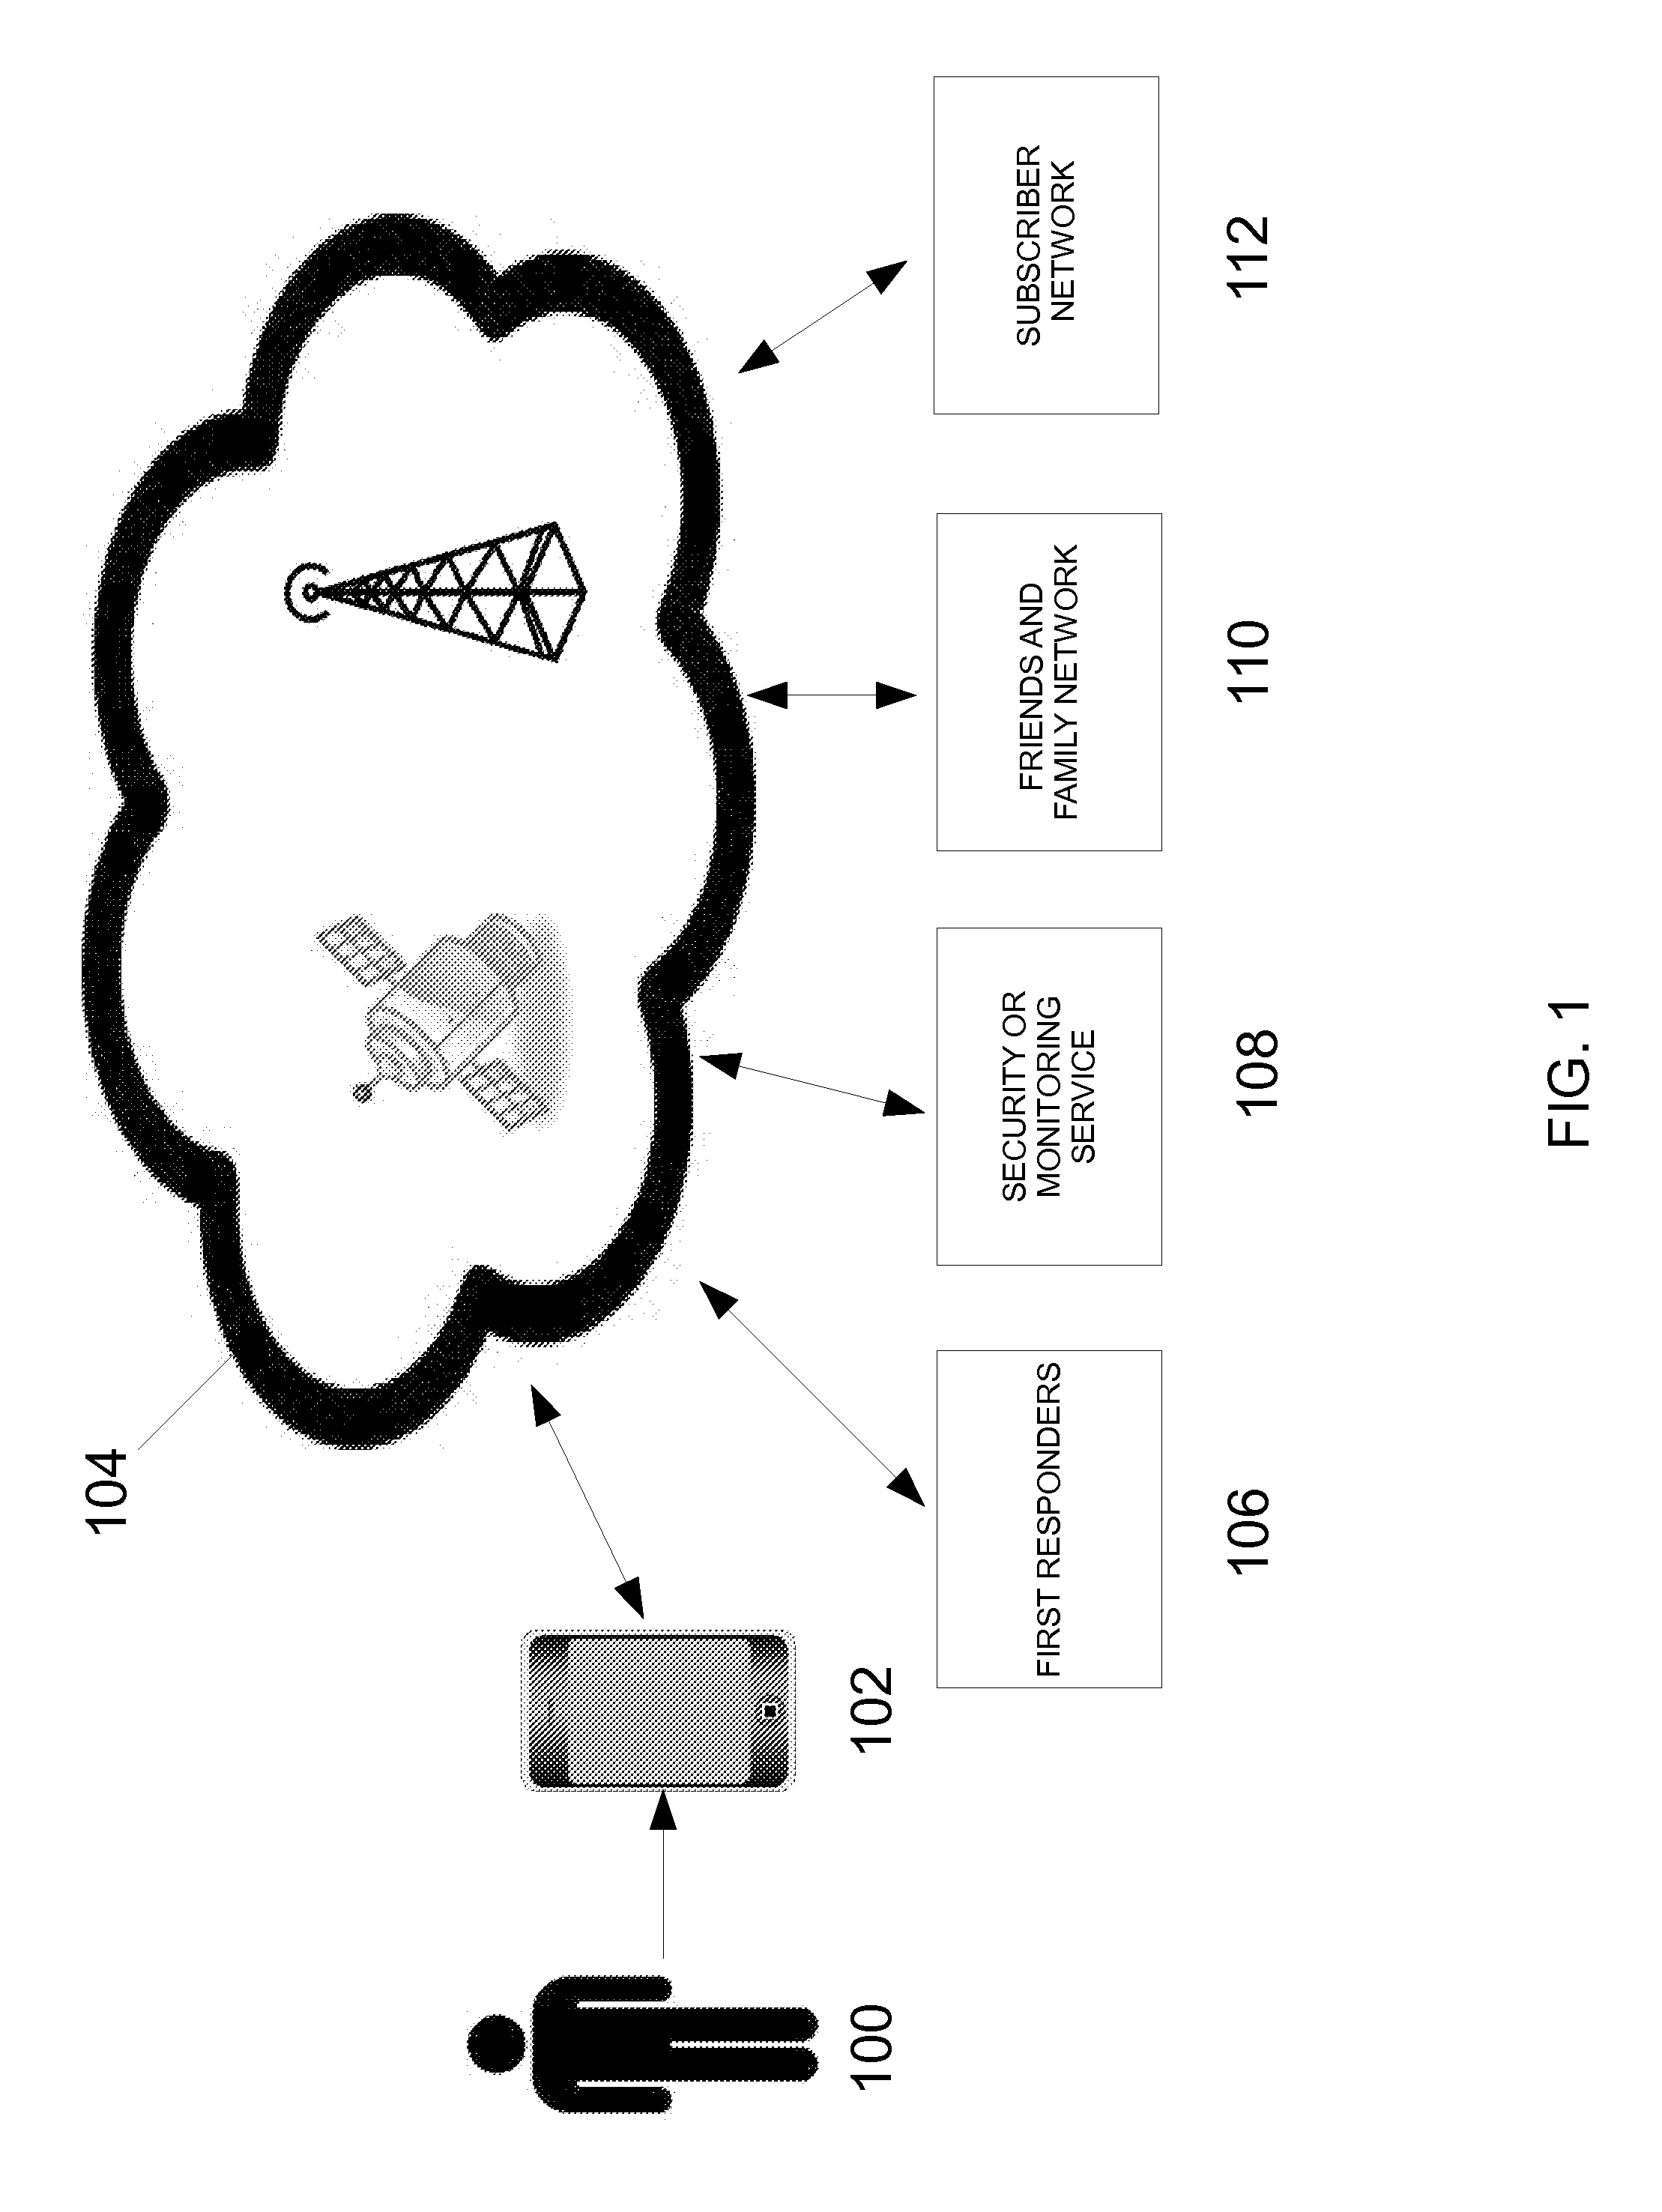 Systems and methods for initiating a distress signal from a mobile device without requiring focused visual attention from a user